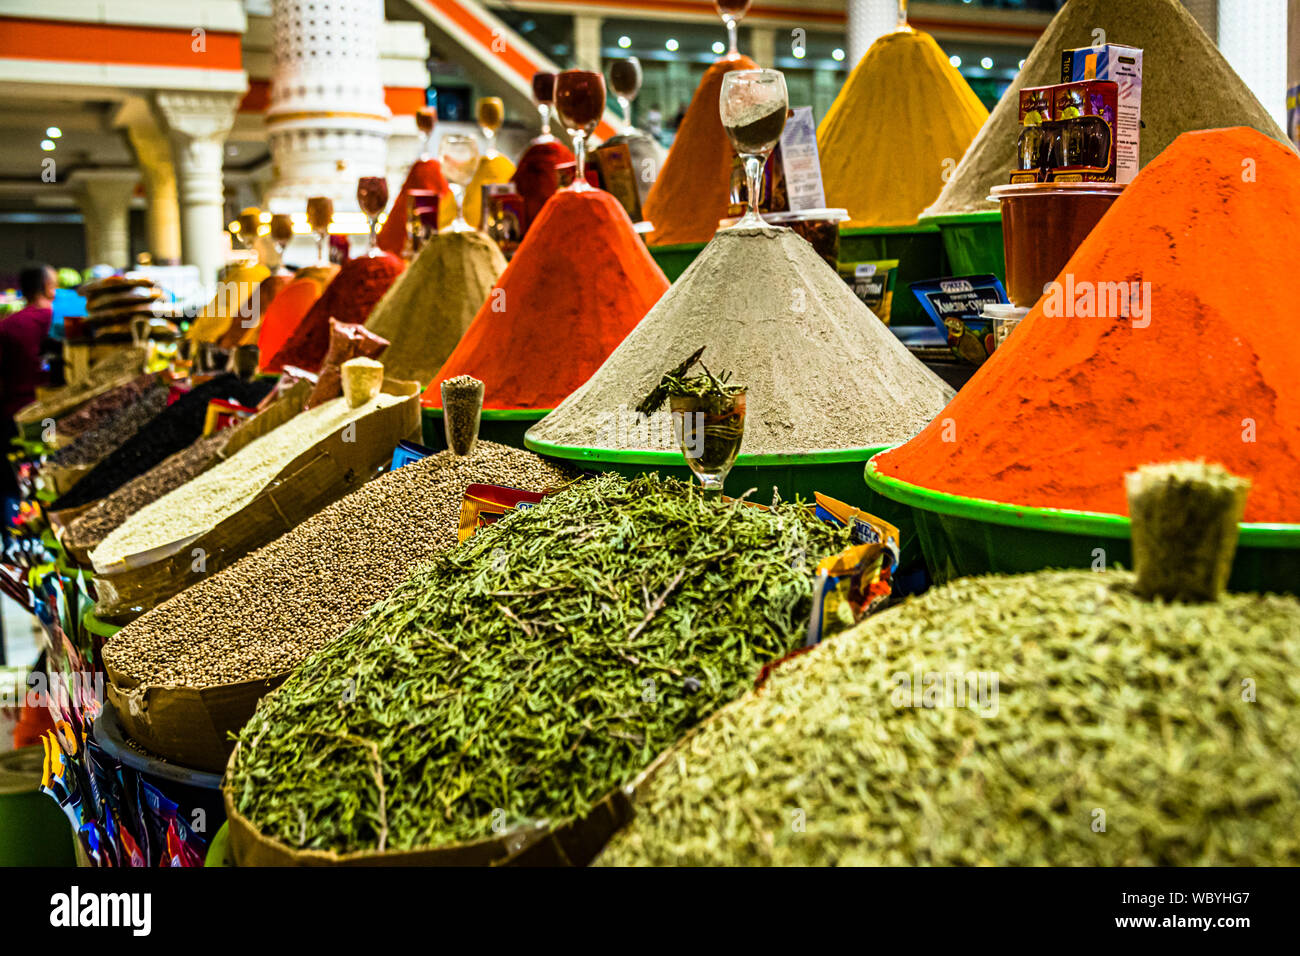 Artfully piled up in the market hall of Dushanbe: Spices such as bell pepper, mustard seeds, paprika, turmeric or - rather hidden in small quantities - Afghan saffron. Colorful spice cones inside Main Market Hall in Dushanbe,  Capital City of Tajikistan Stock Photo